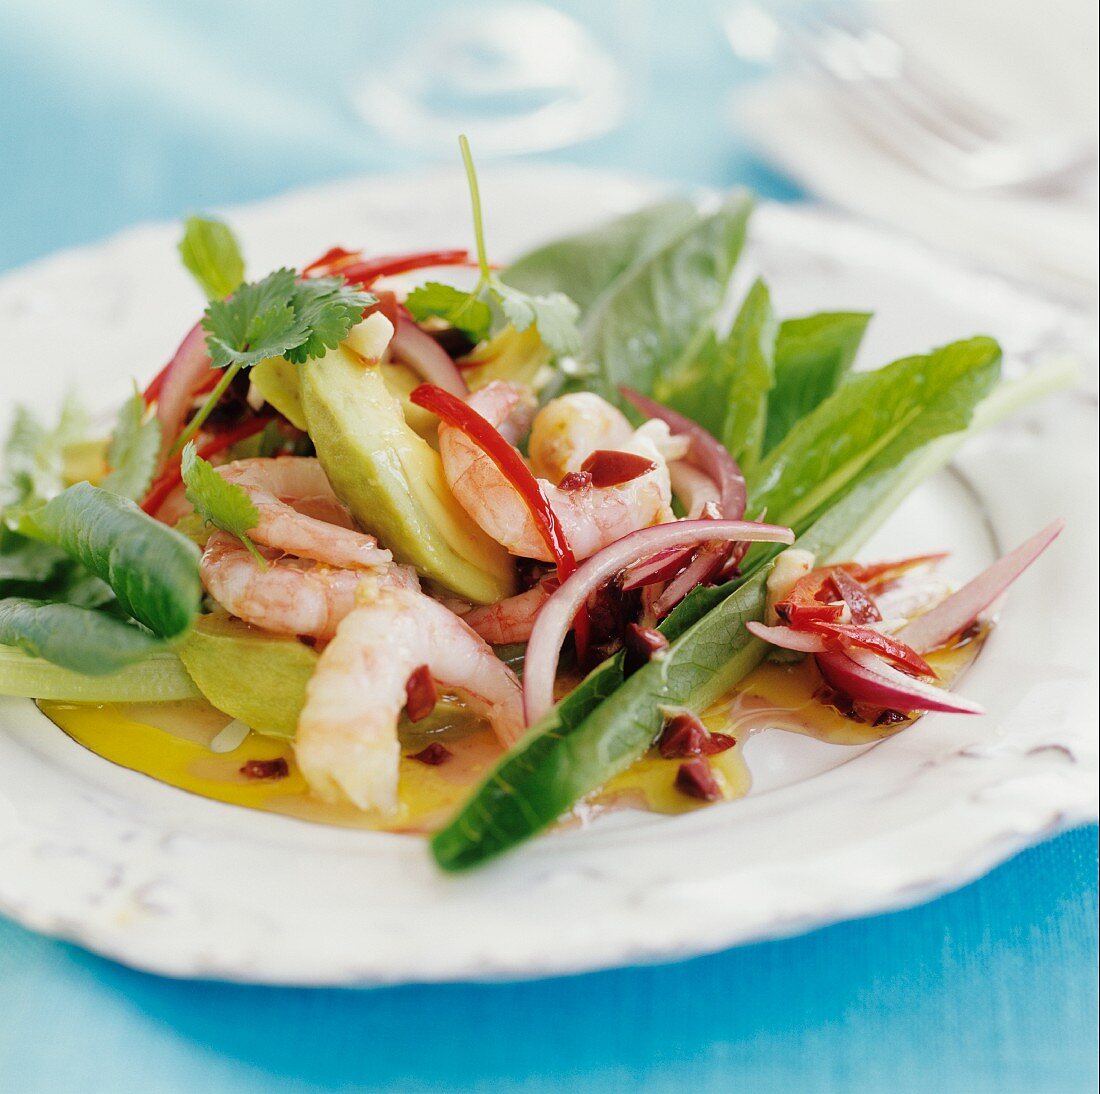 Prawn salad with onions and chillies